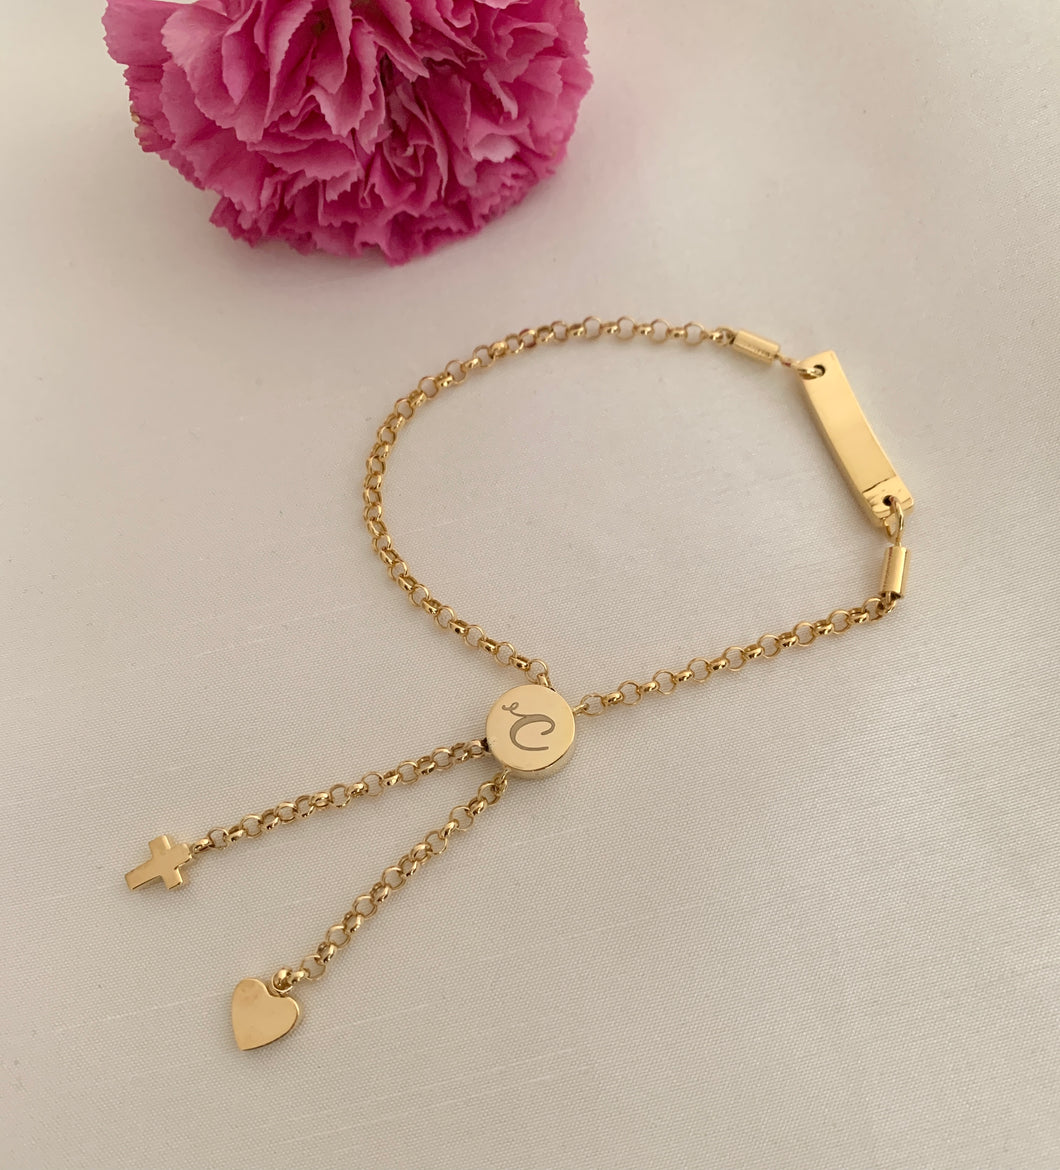 Yellow gold engravable pull-tie bracelet. With a 